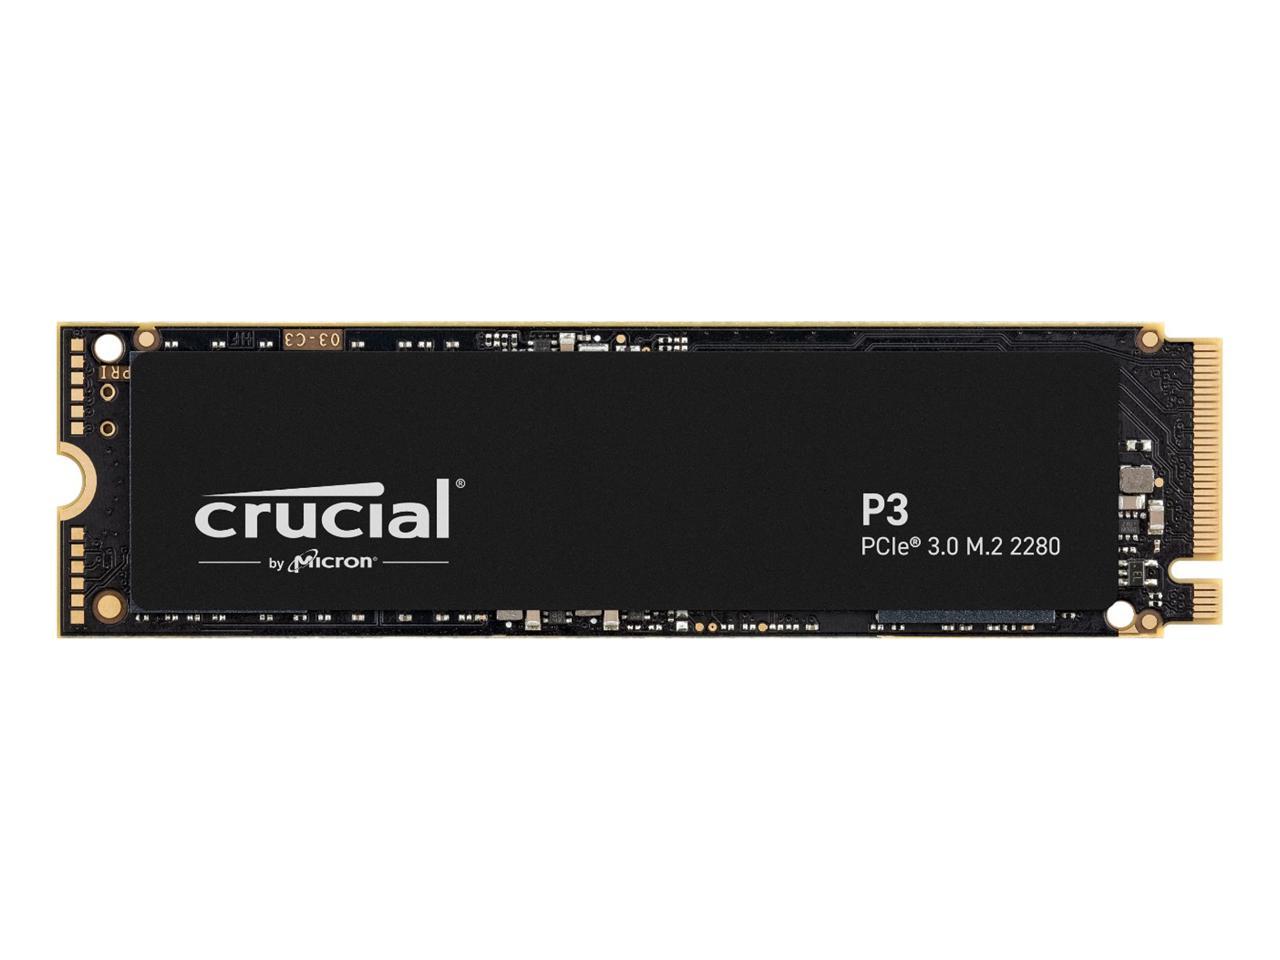 4TB Crucial P3 PCIe Gen3 NVMe M.2 3D NAND Solid State Drive $195 + Free Shipping